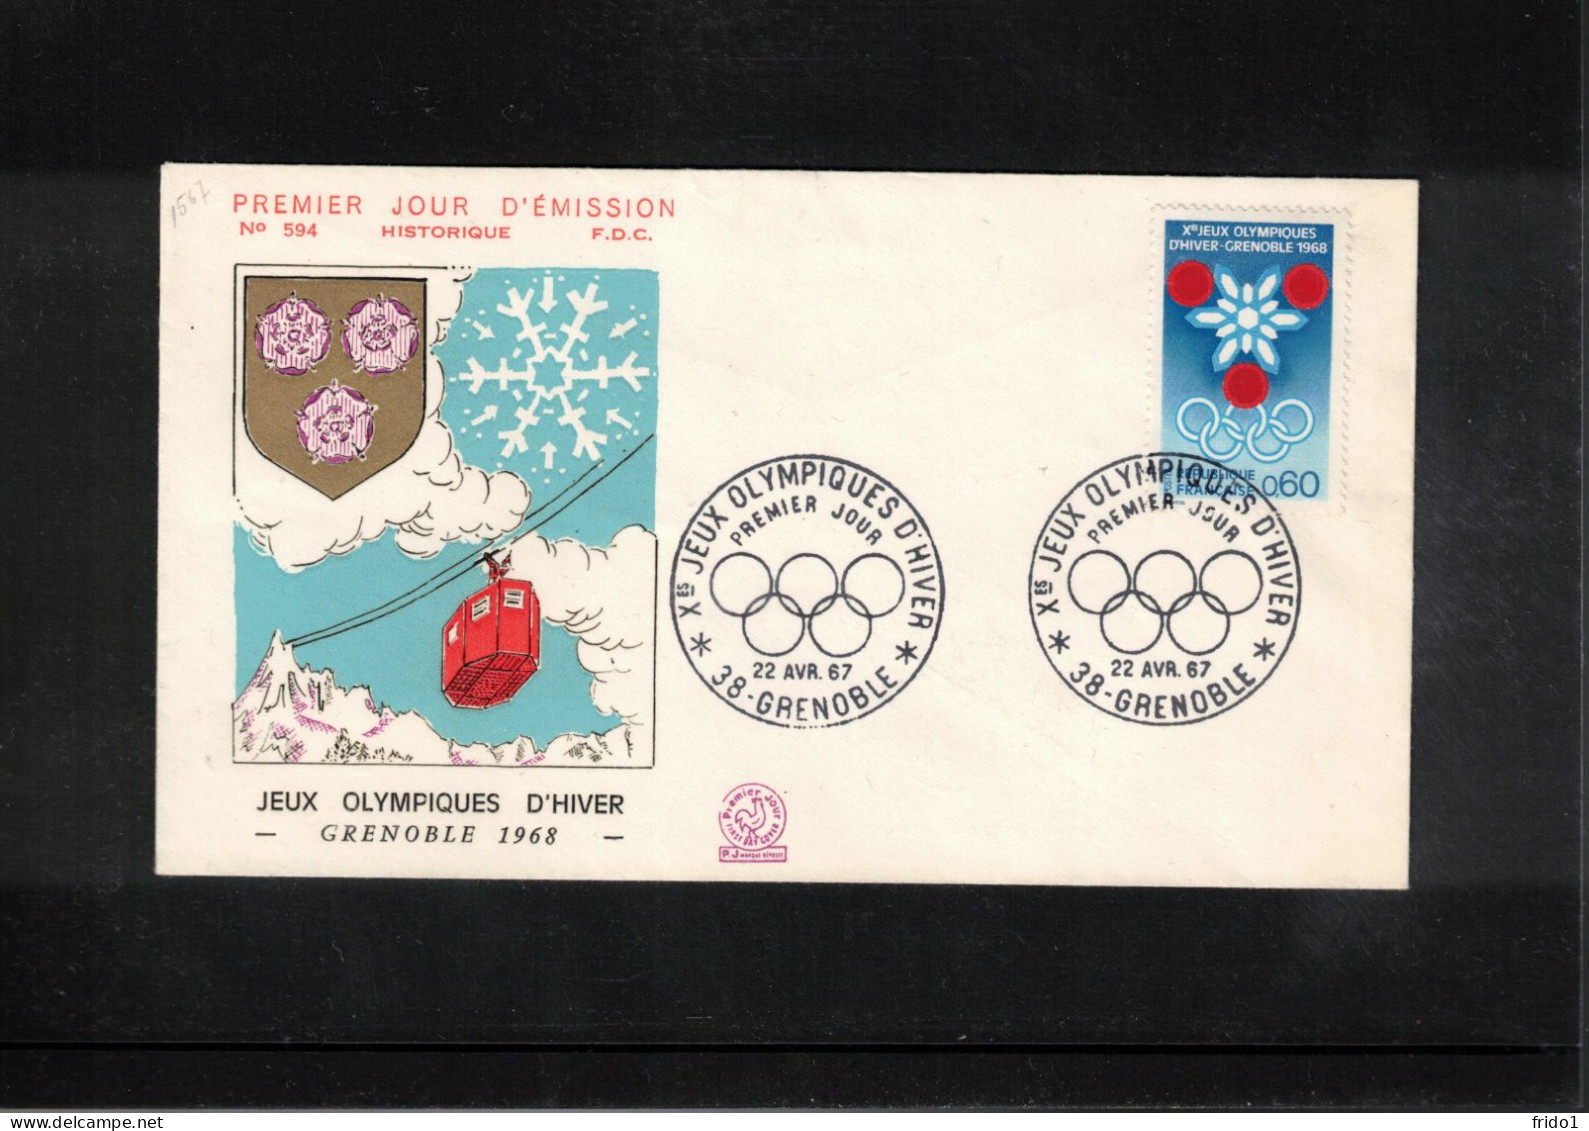 France 1967 Olympic Games Grenoble FDC - Hiver 1968: Grenoble